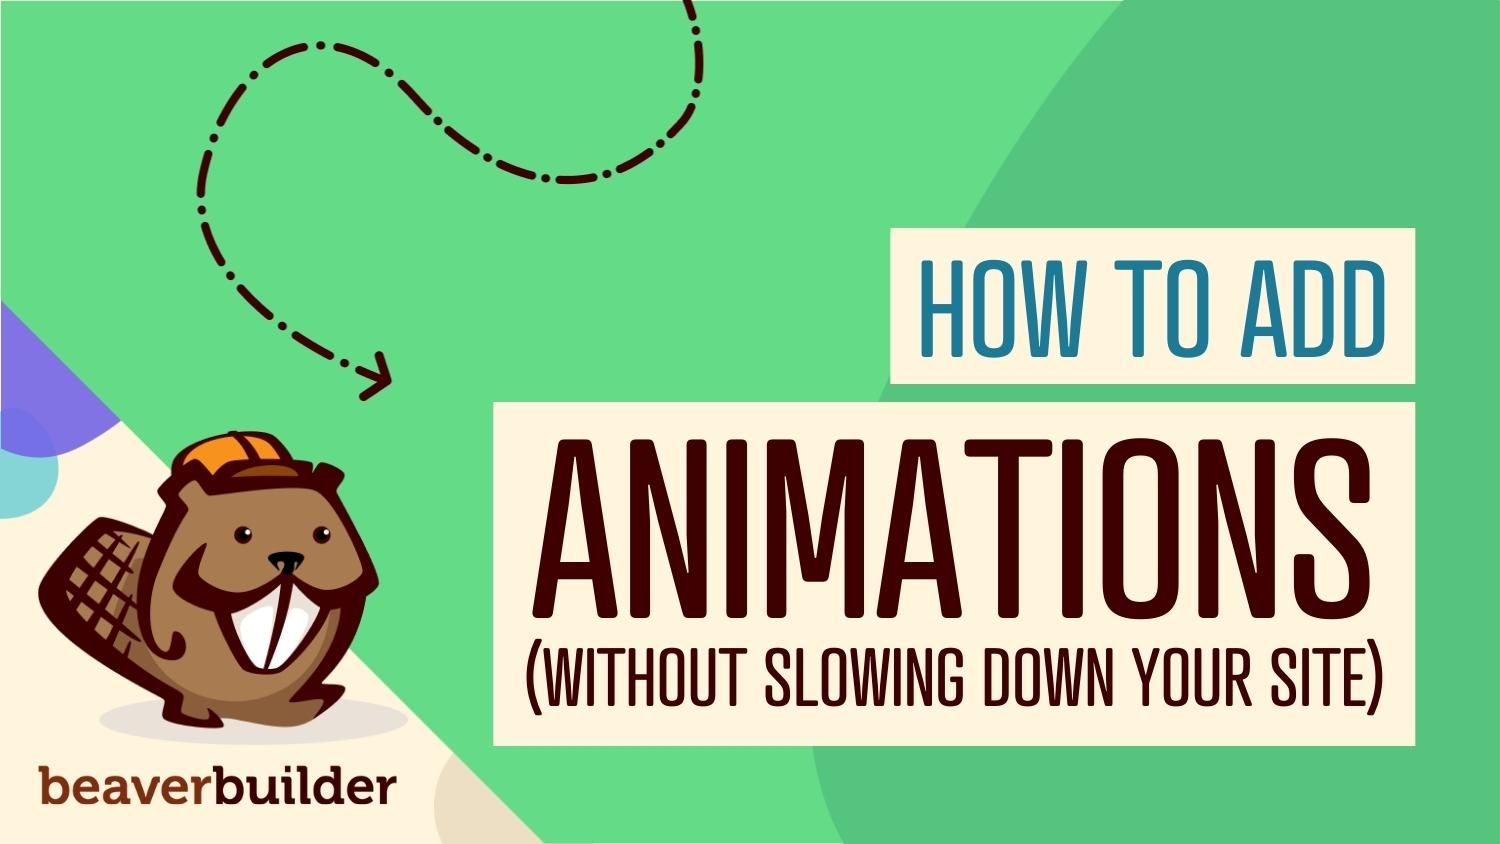 How to add animations to WordPress without slowing down your site | Beaver Builder Blog